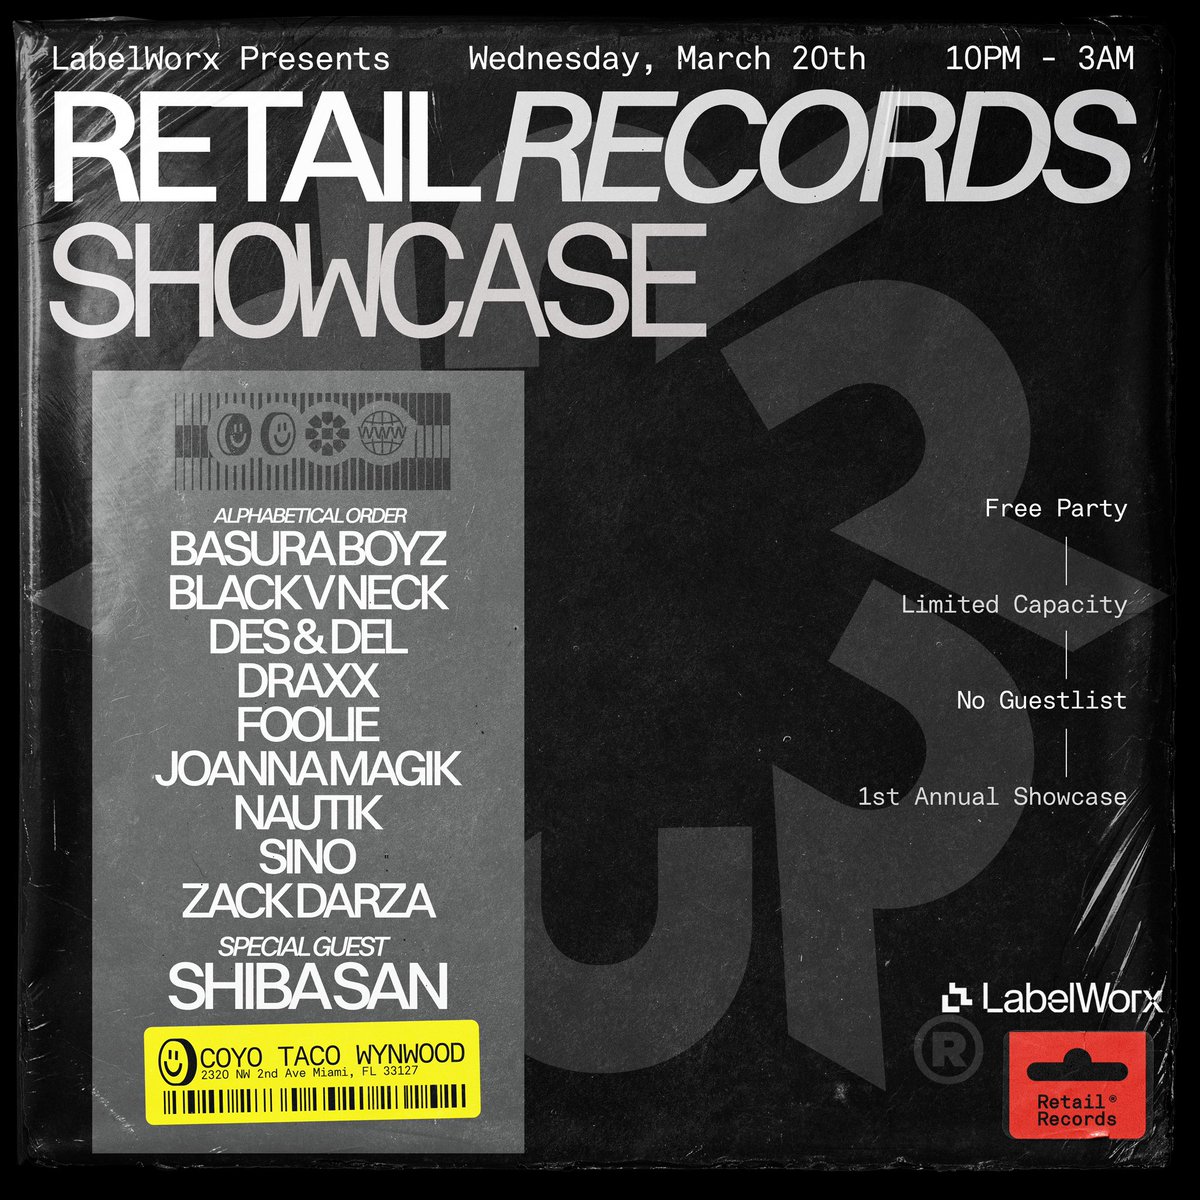 Our first ever @RetailRecords showcase is here and it will be a FREE PARTY 🥳